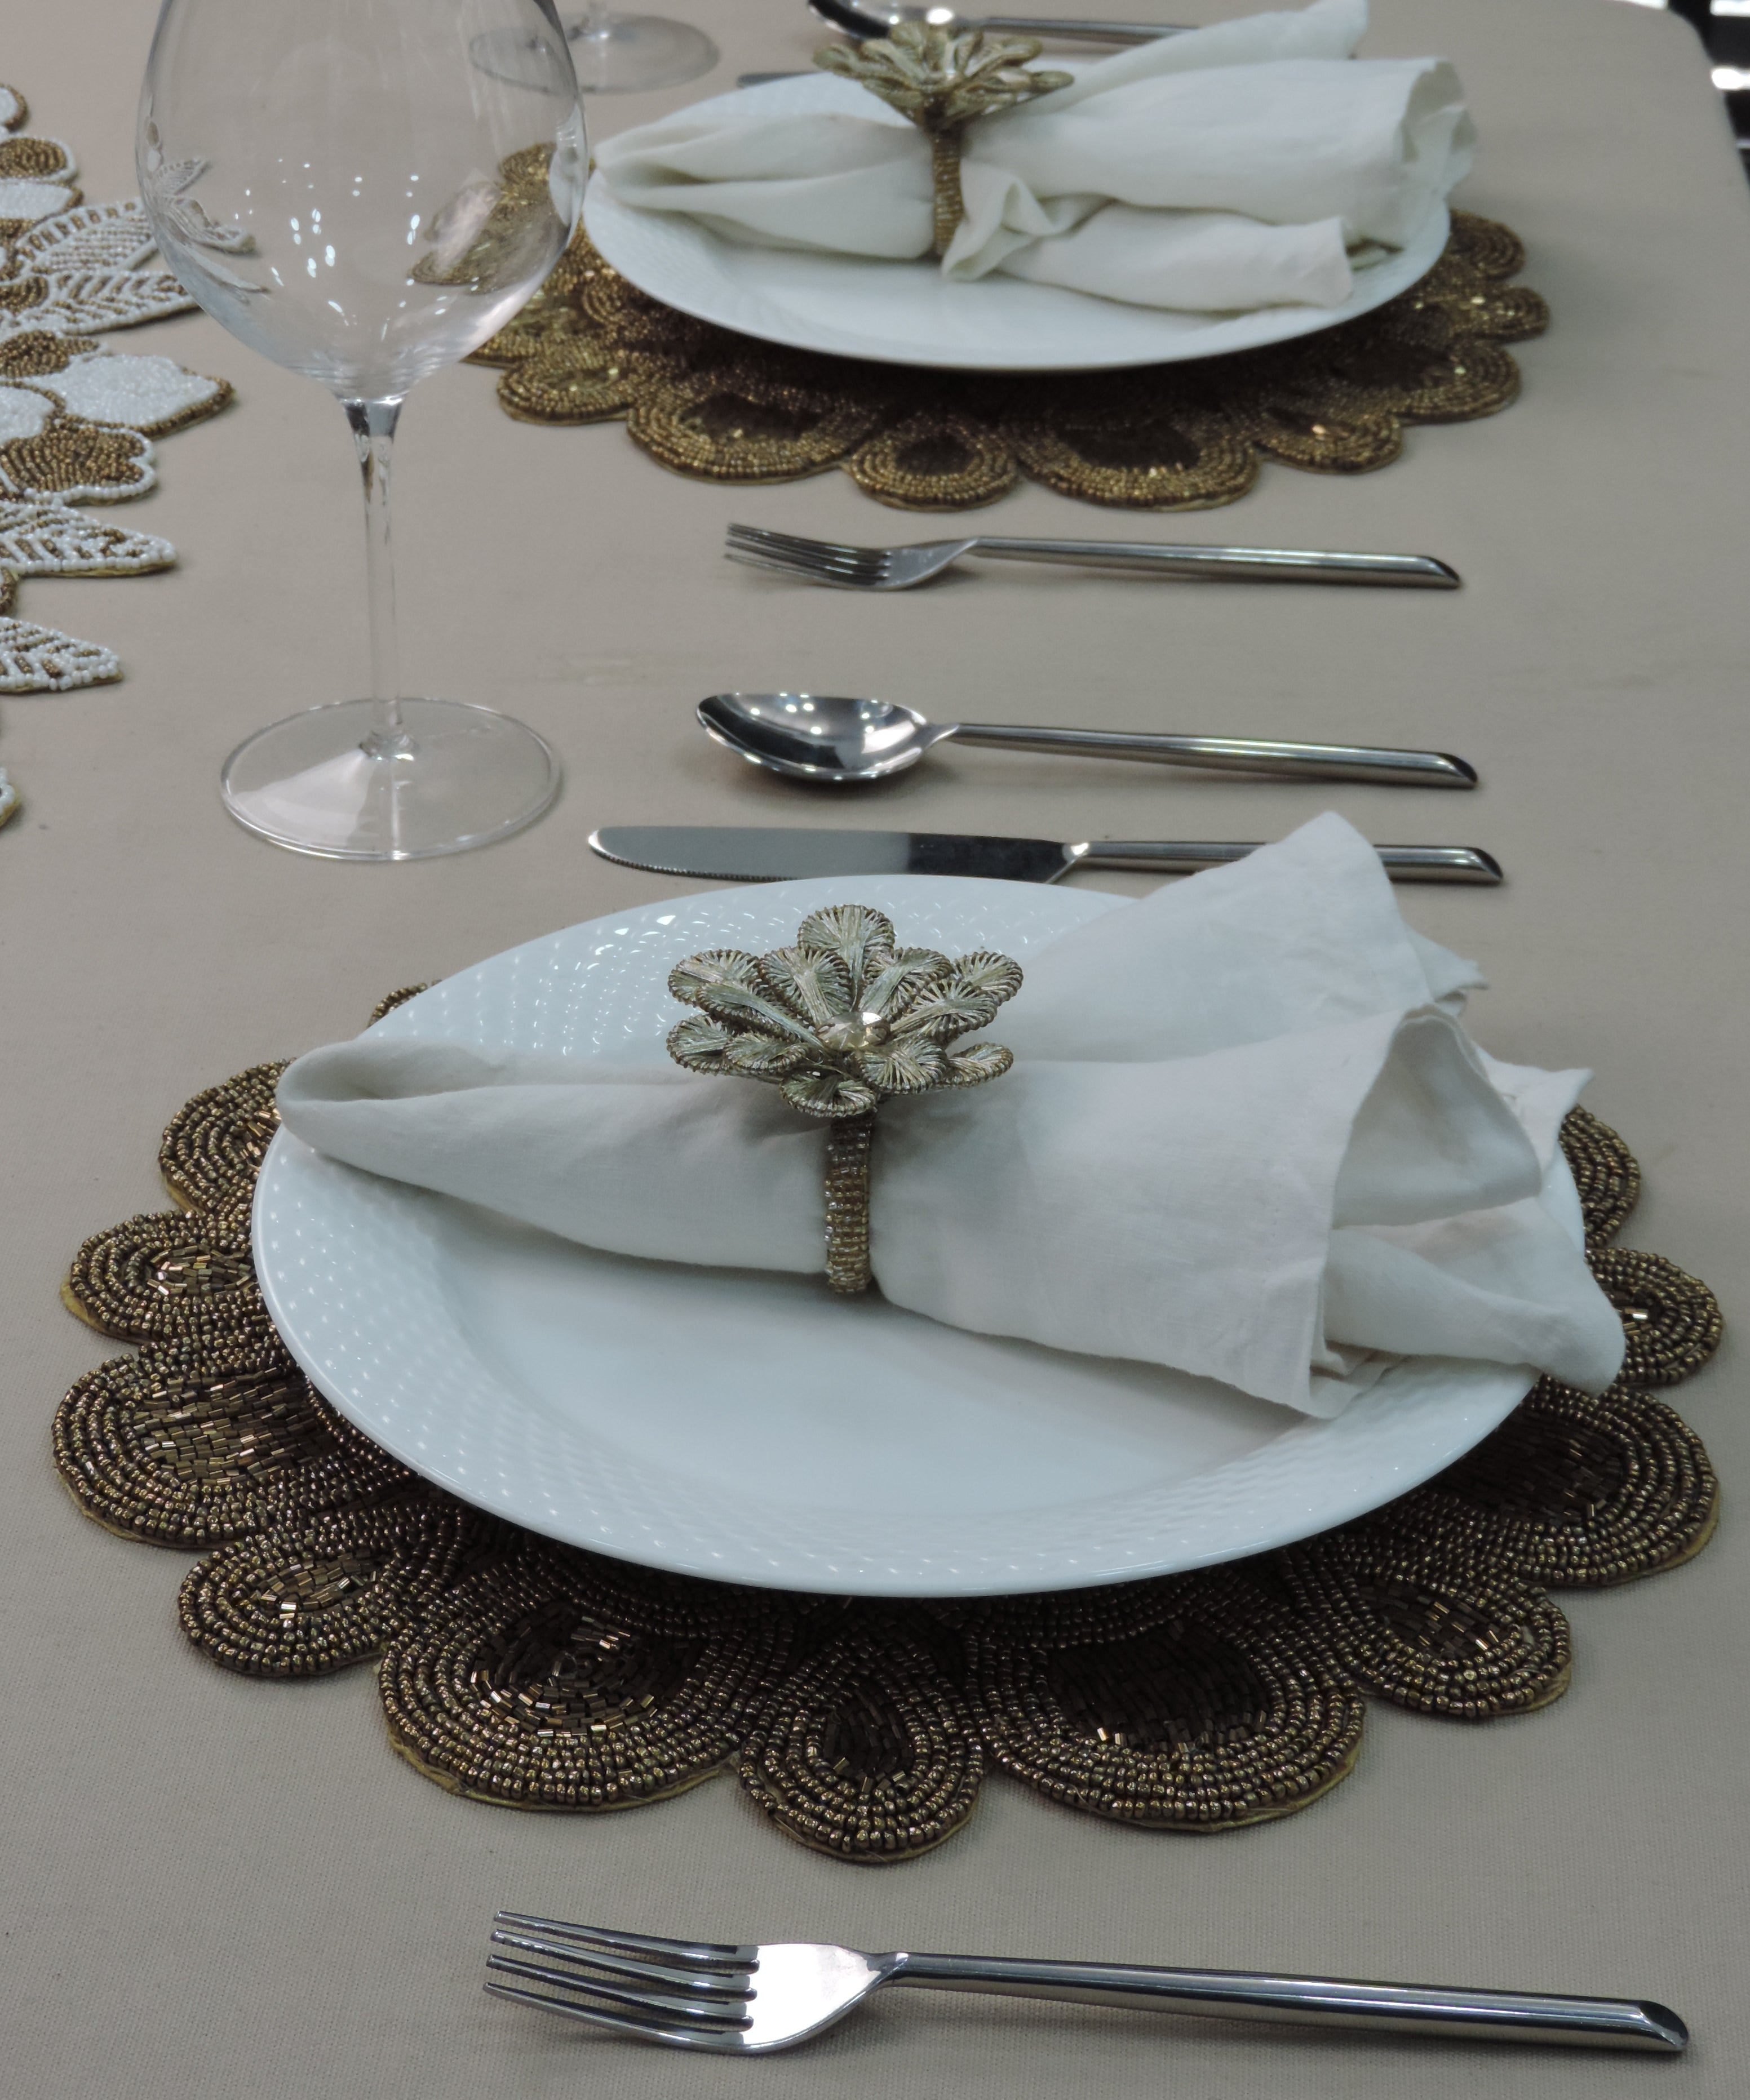 Glass Bead Flower Embroidered Placemats, Chargers / Set of 2 / 14in. Round / Antique Gold